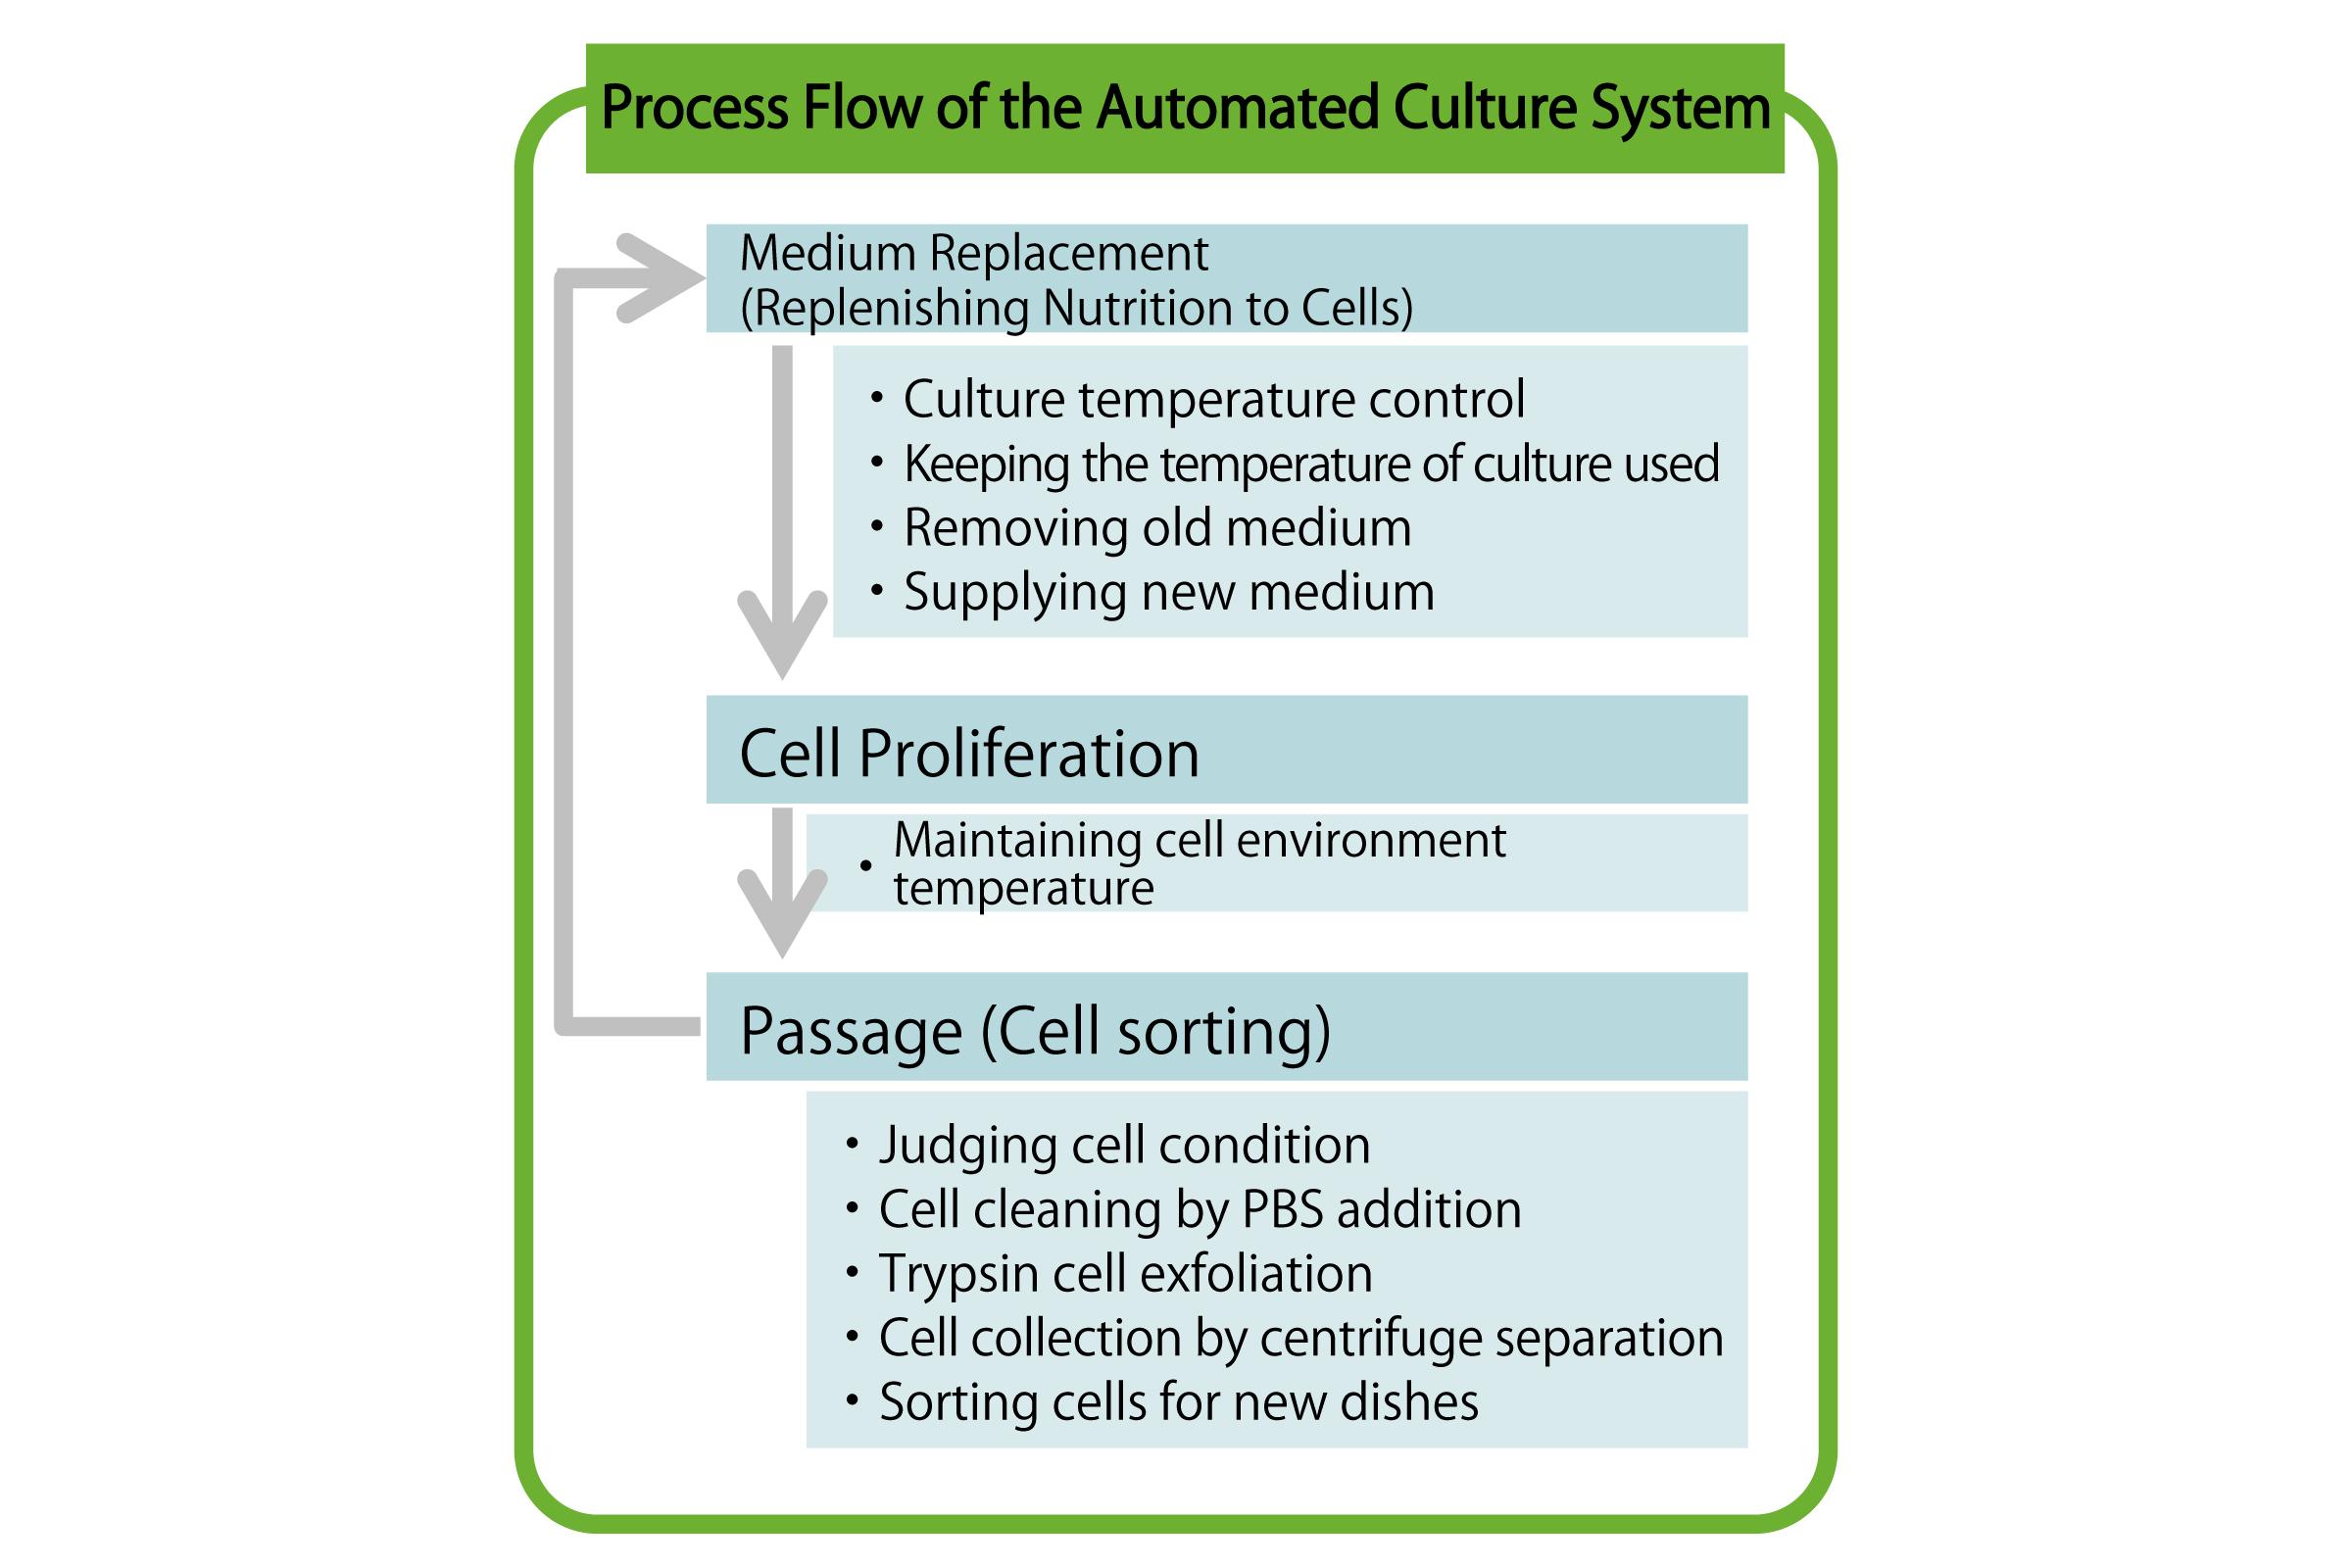 figure: Process Flow of the Automated Culture System